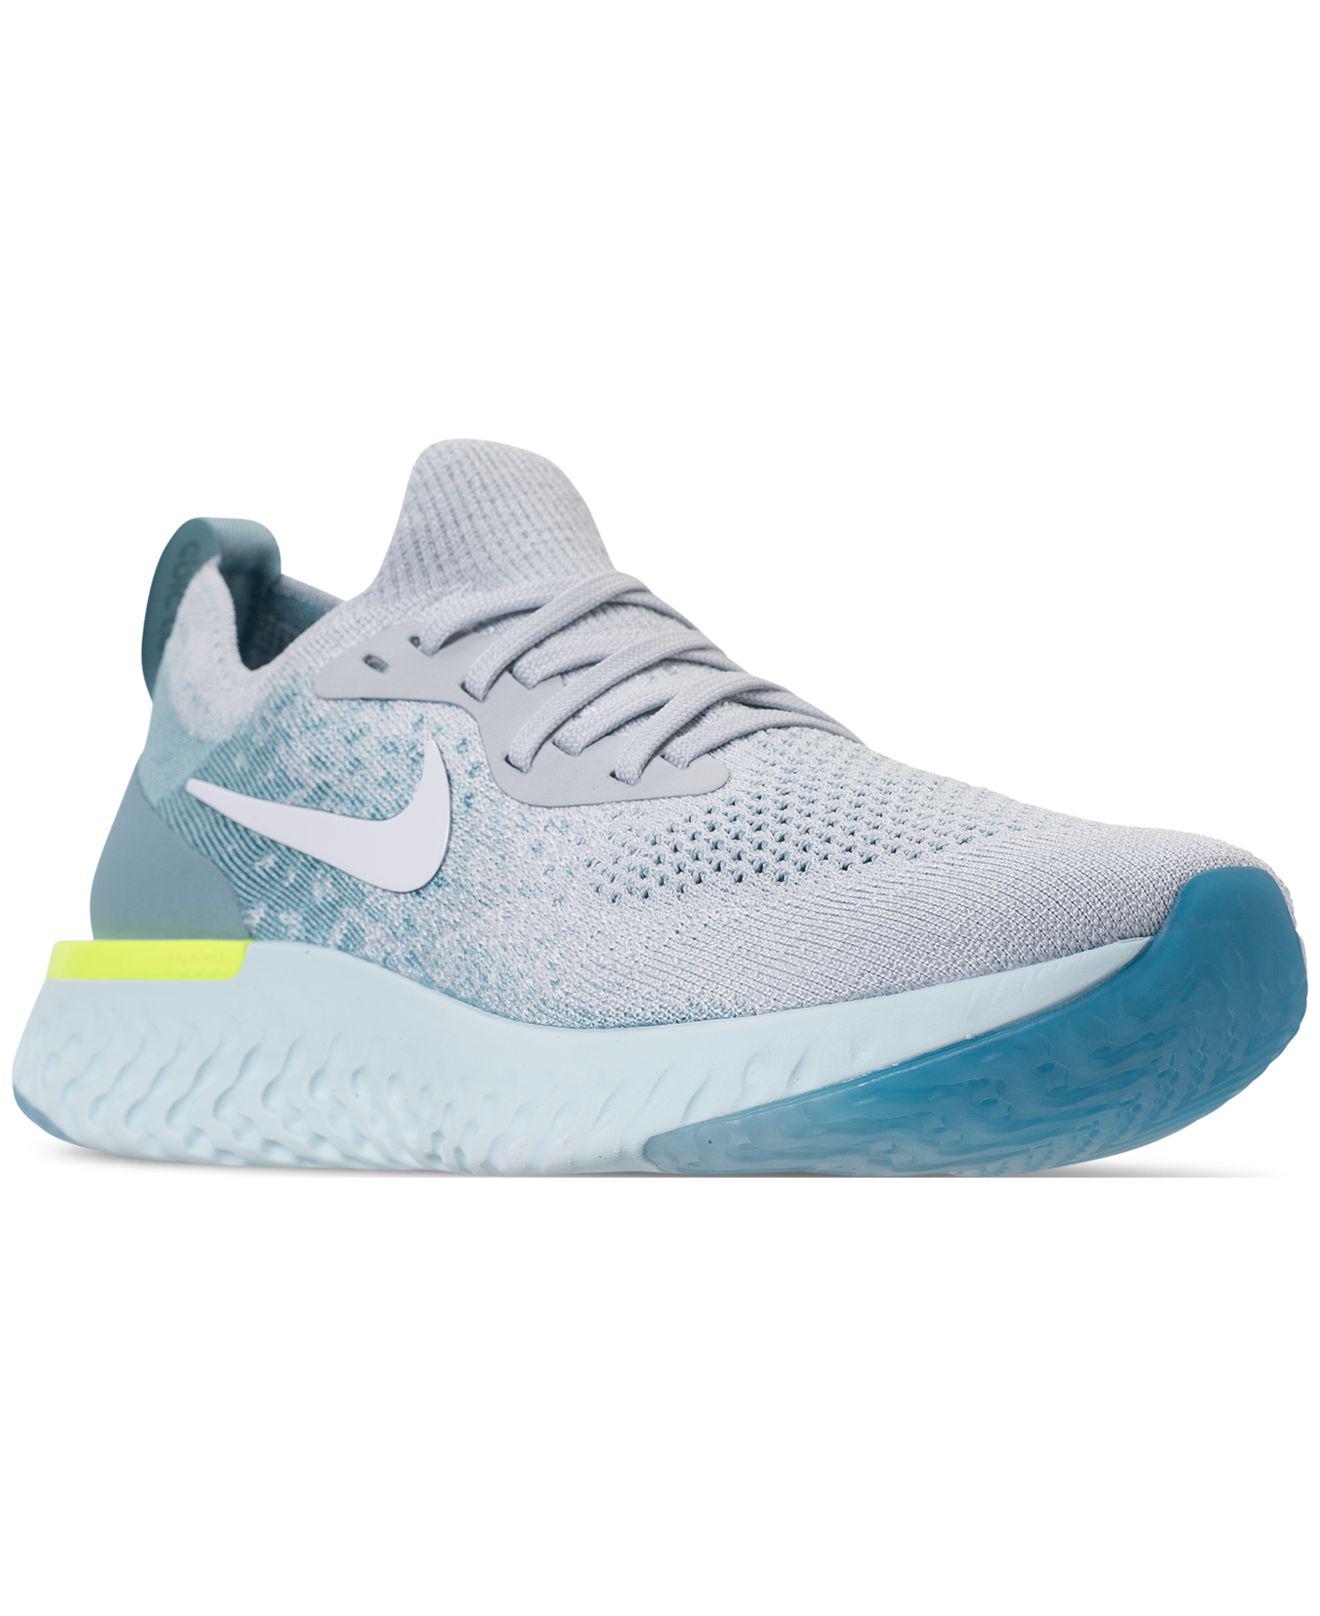 finish line epic react flyknit 2